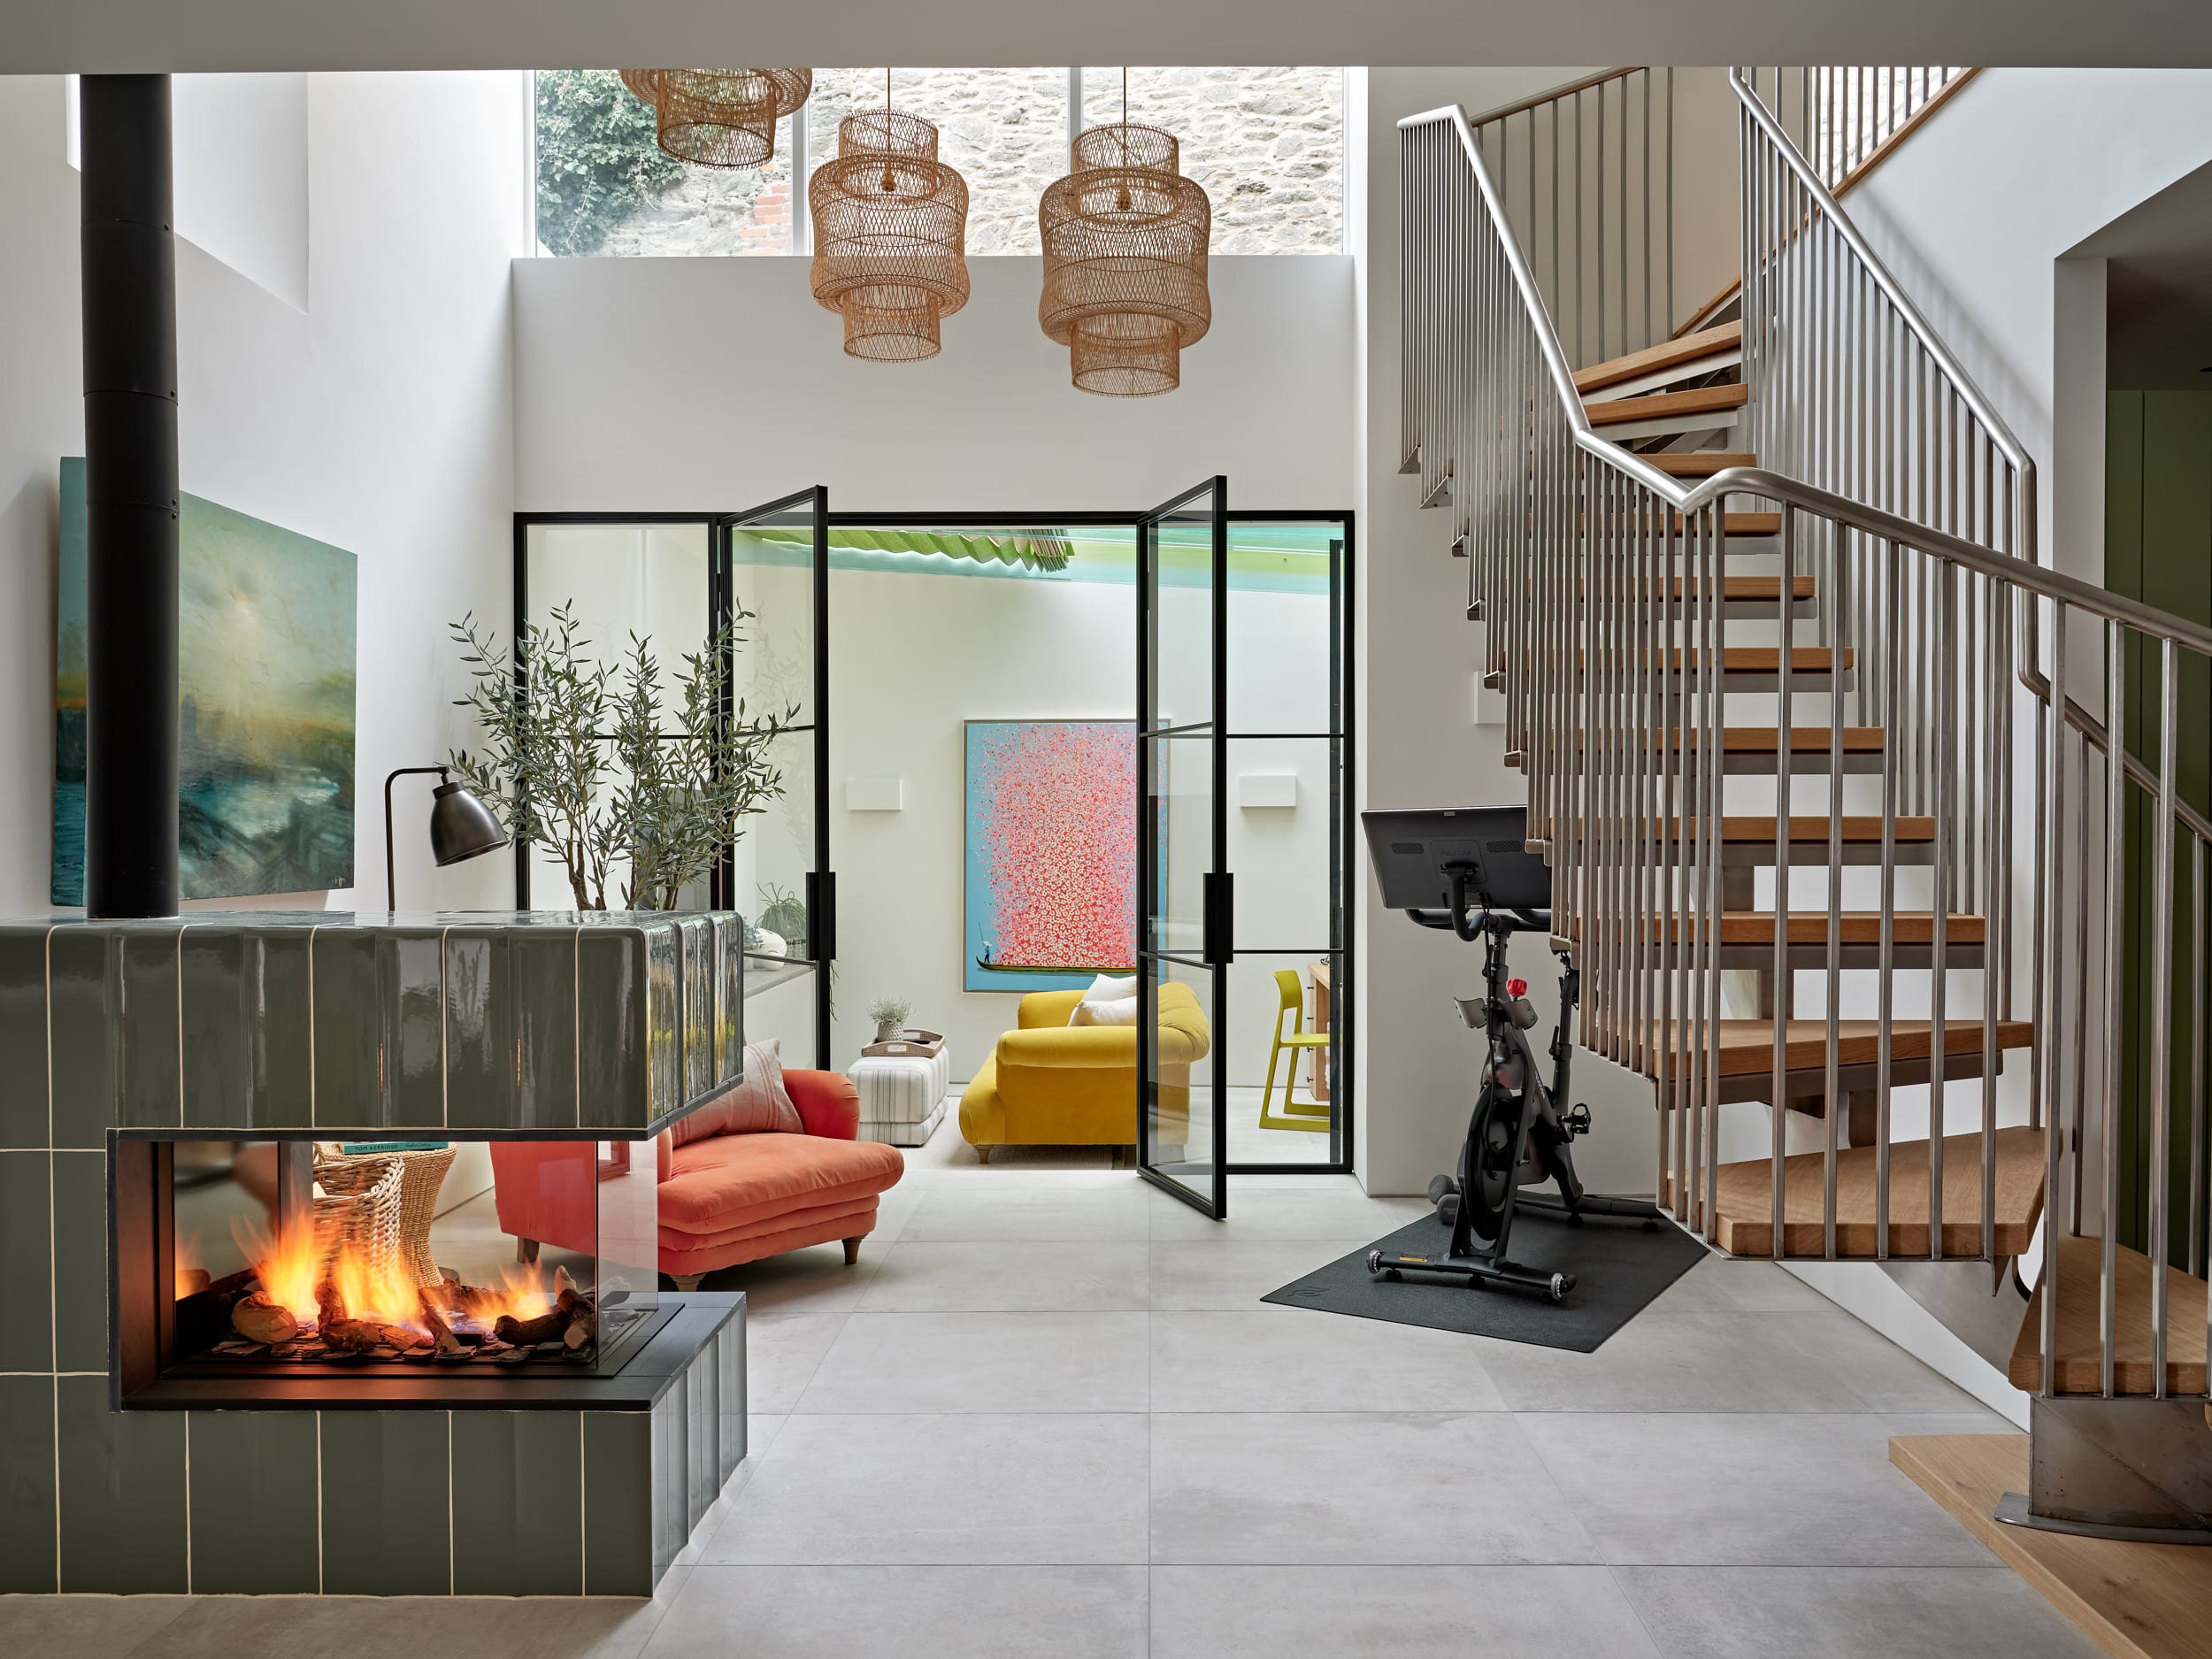 Airy living space separated by green tiled fireplace.